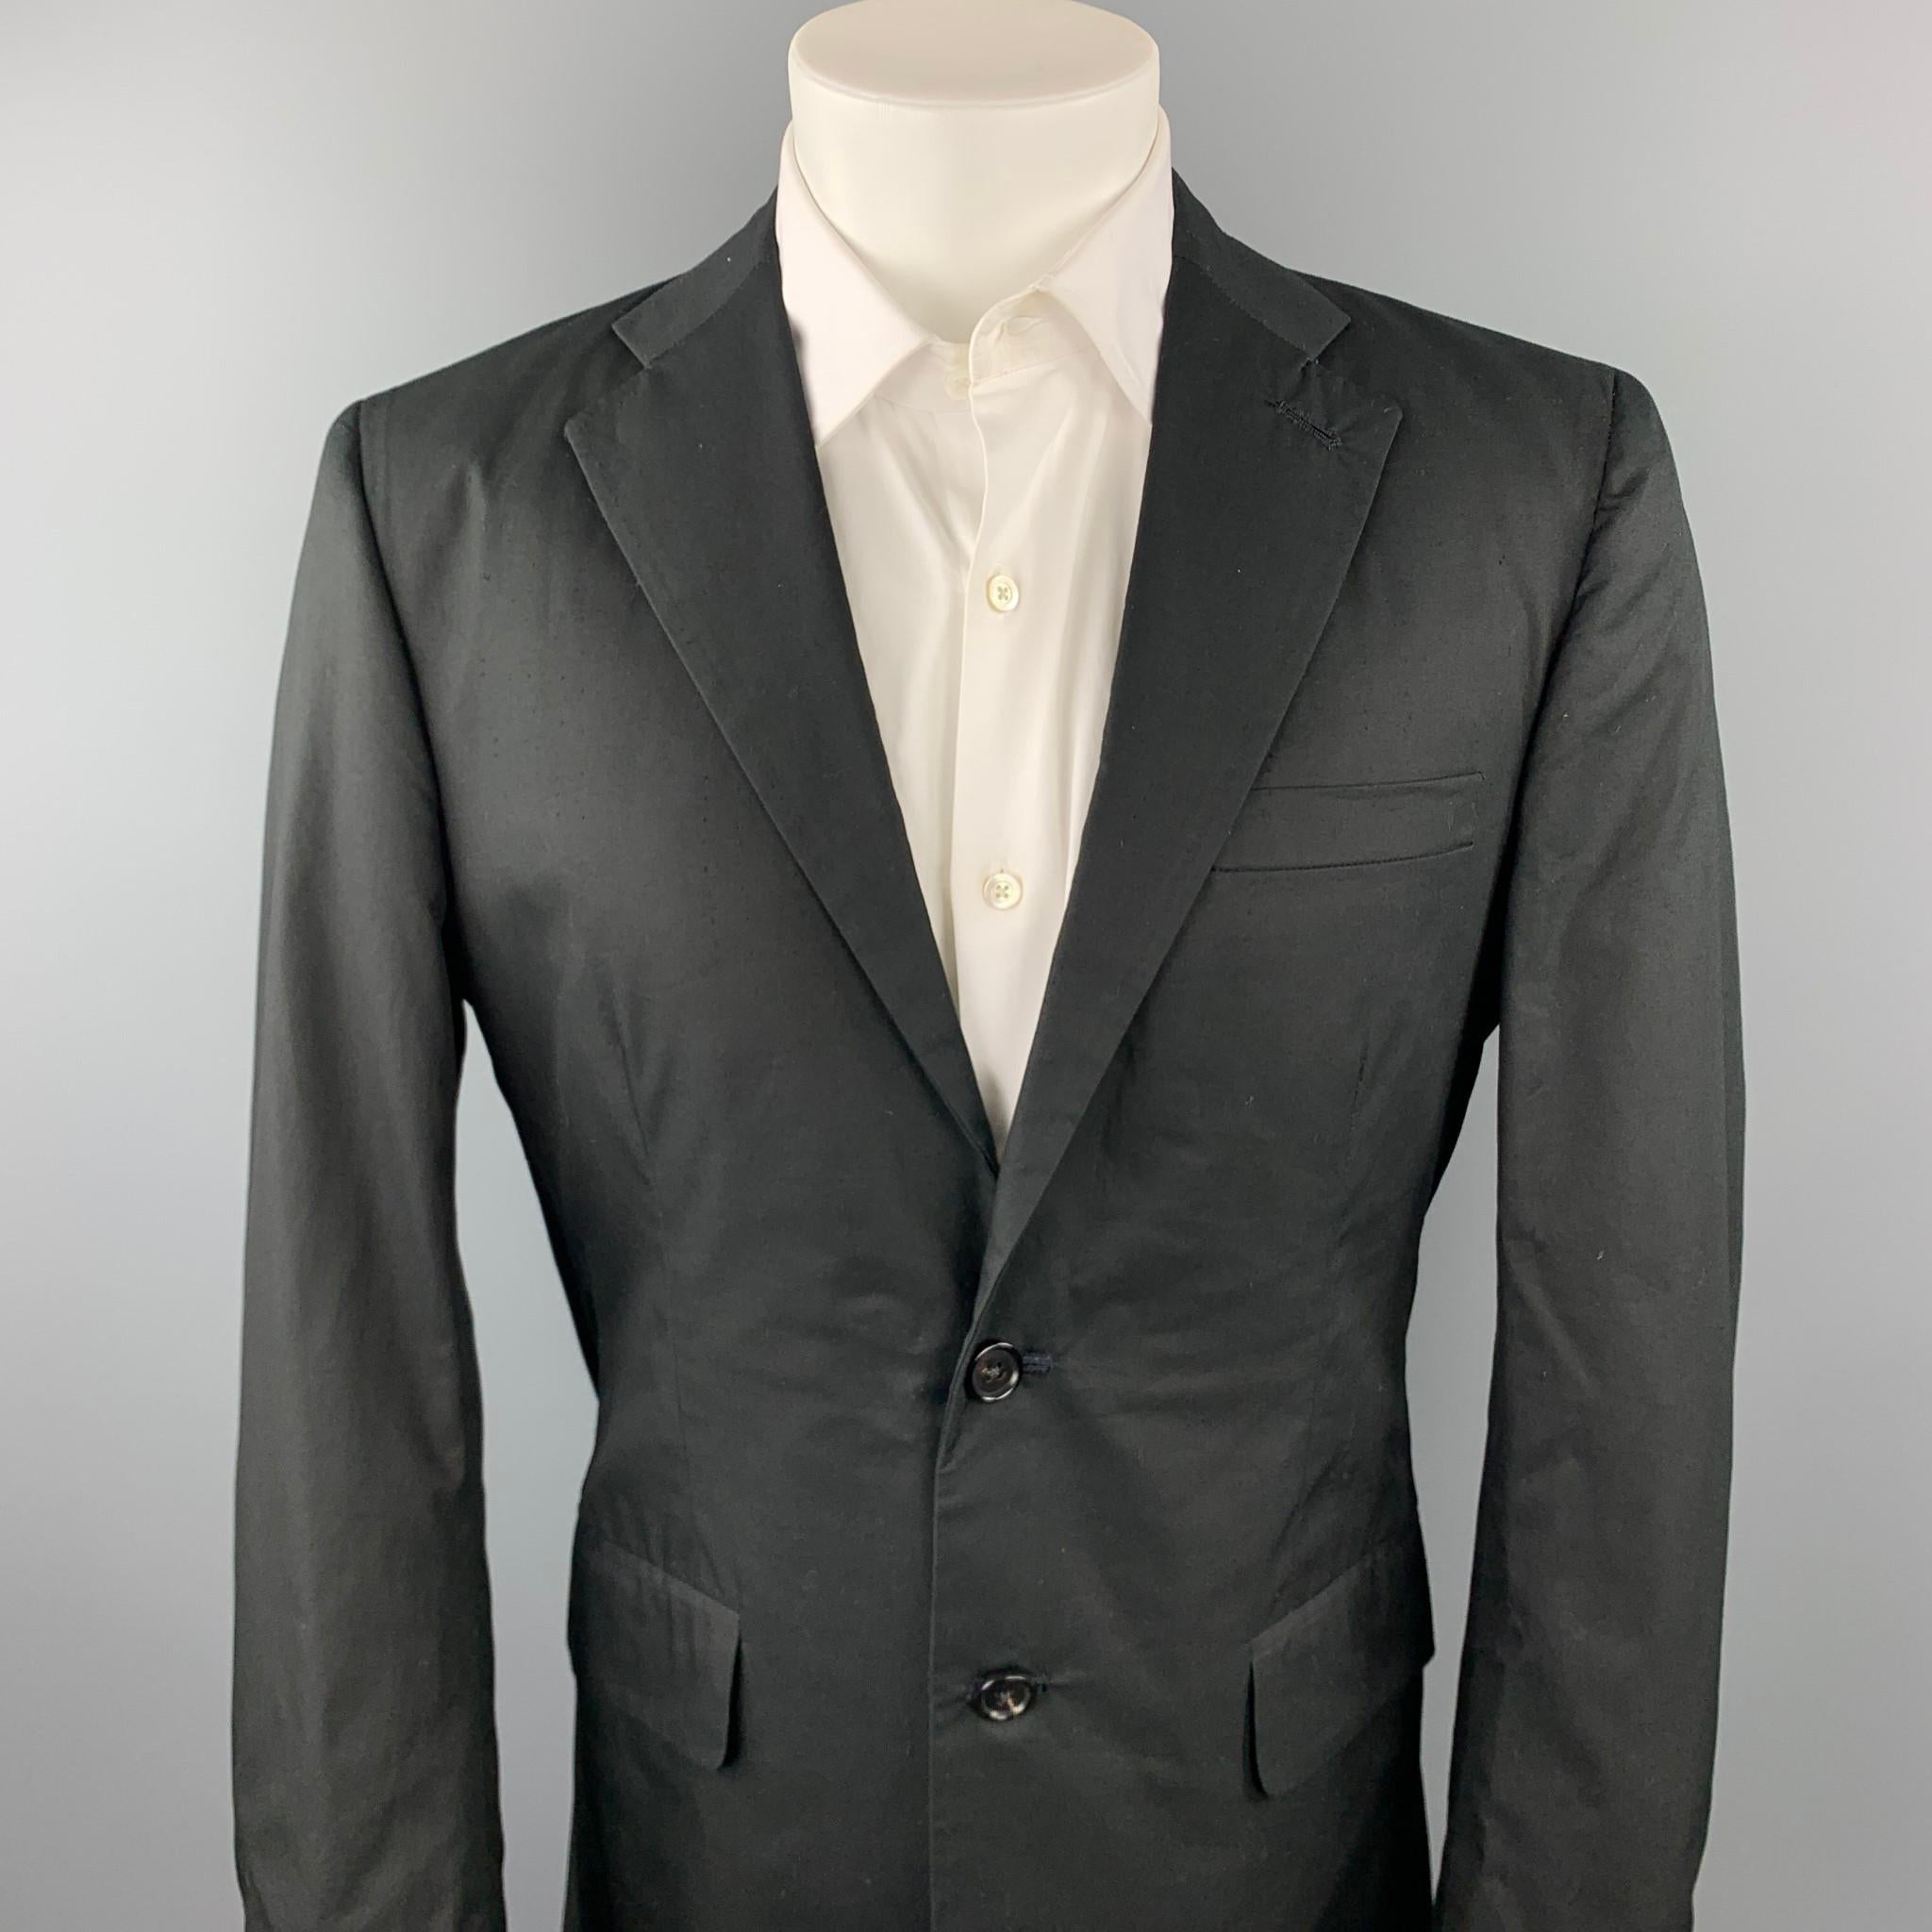 R13 sport coat comes in a black cotton with a back embroidered 